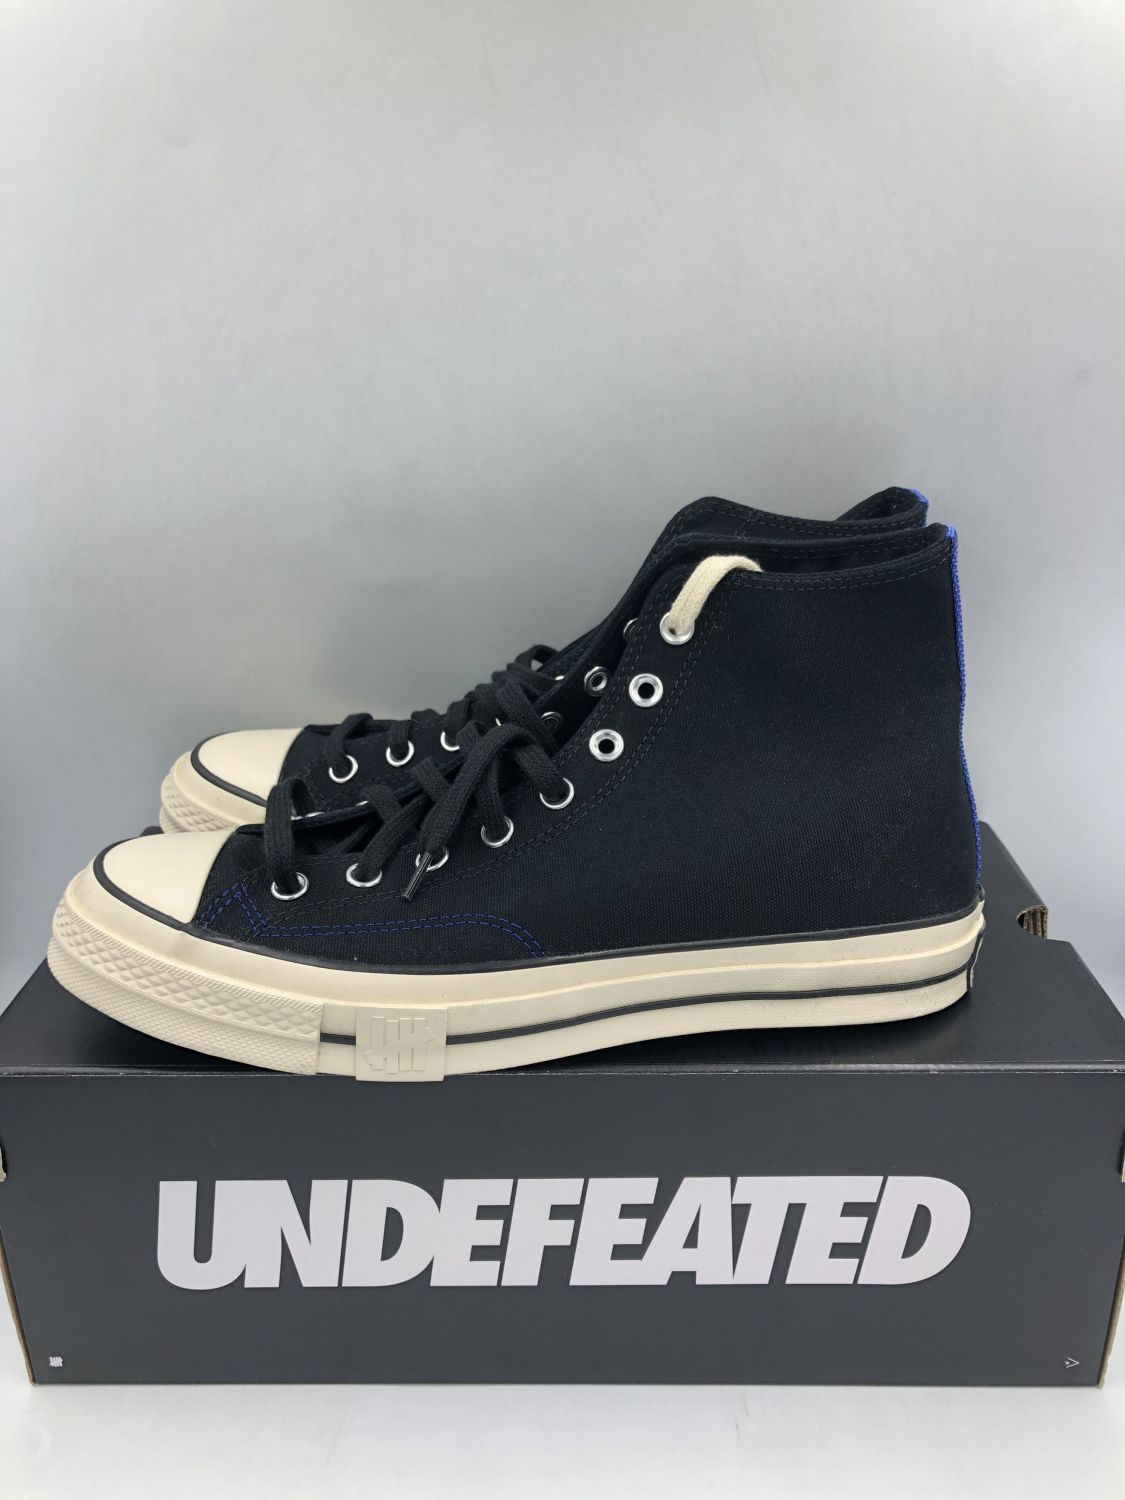 Undefeated X Converse 70 Hi - Black/Natural Ivory | AfterMarket